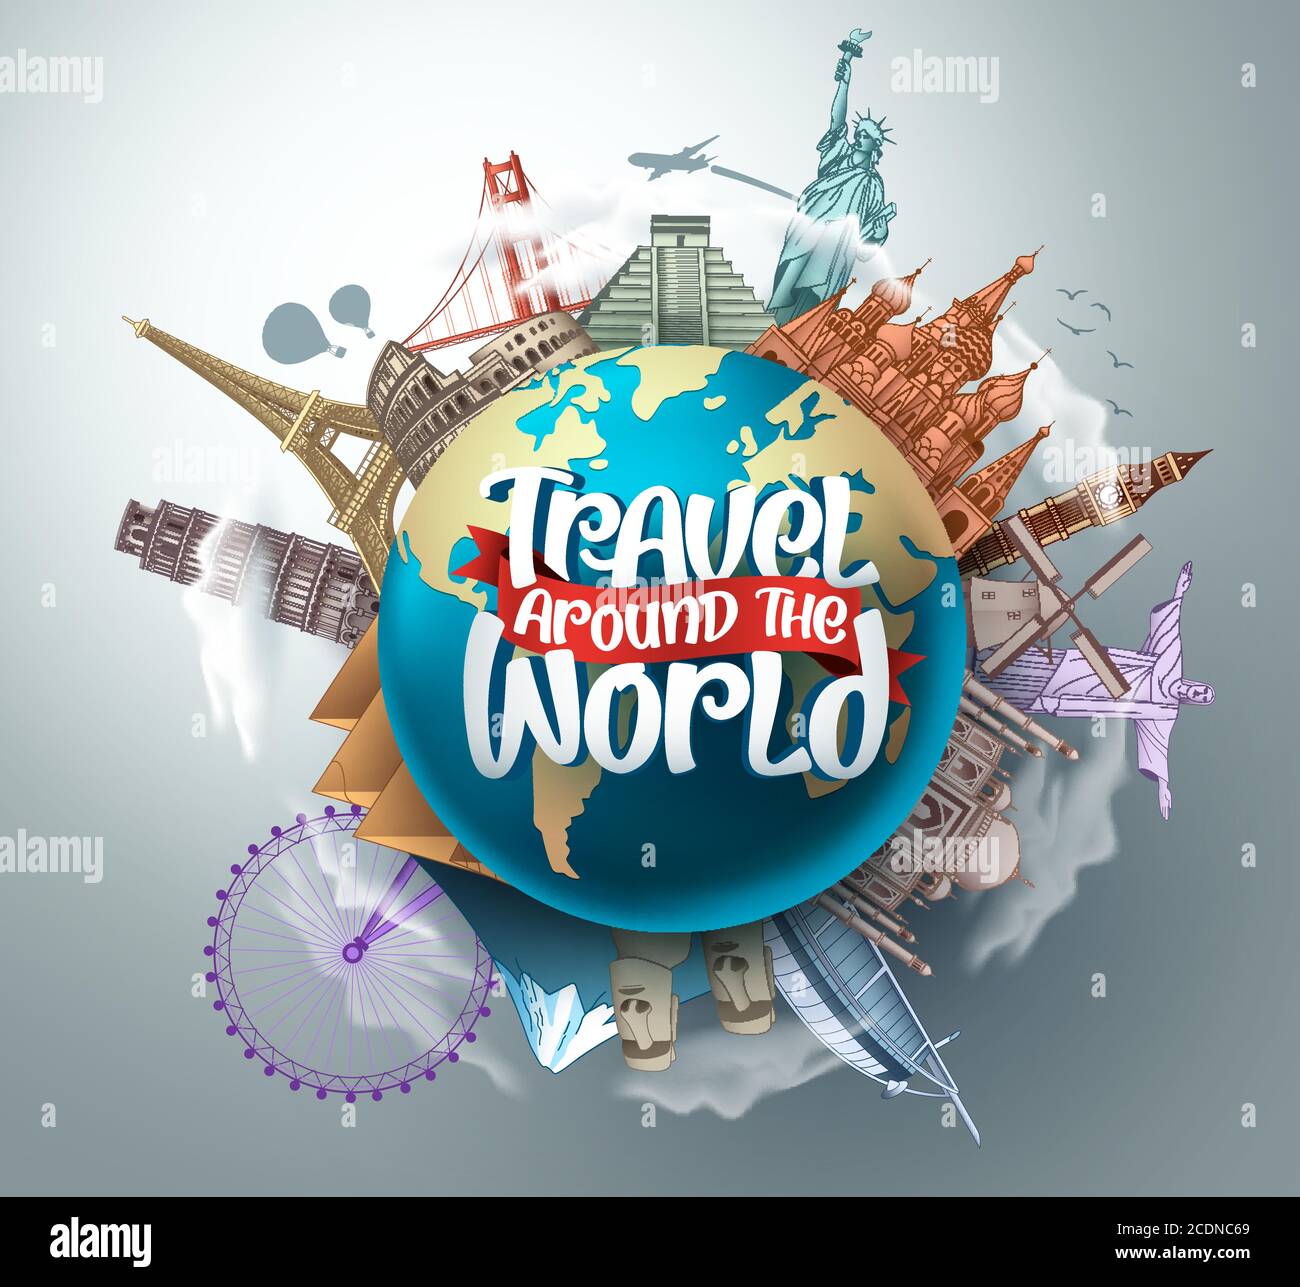 Travel around the world vector landmarks design. Travel in famous tourism landmarks and world attractions elements and text in a 3d globe empty space. Stock Vector